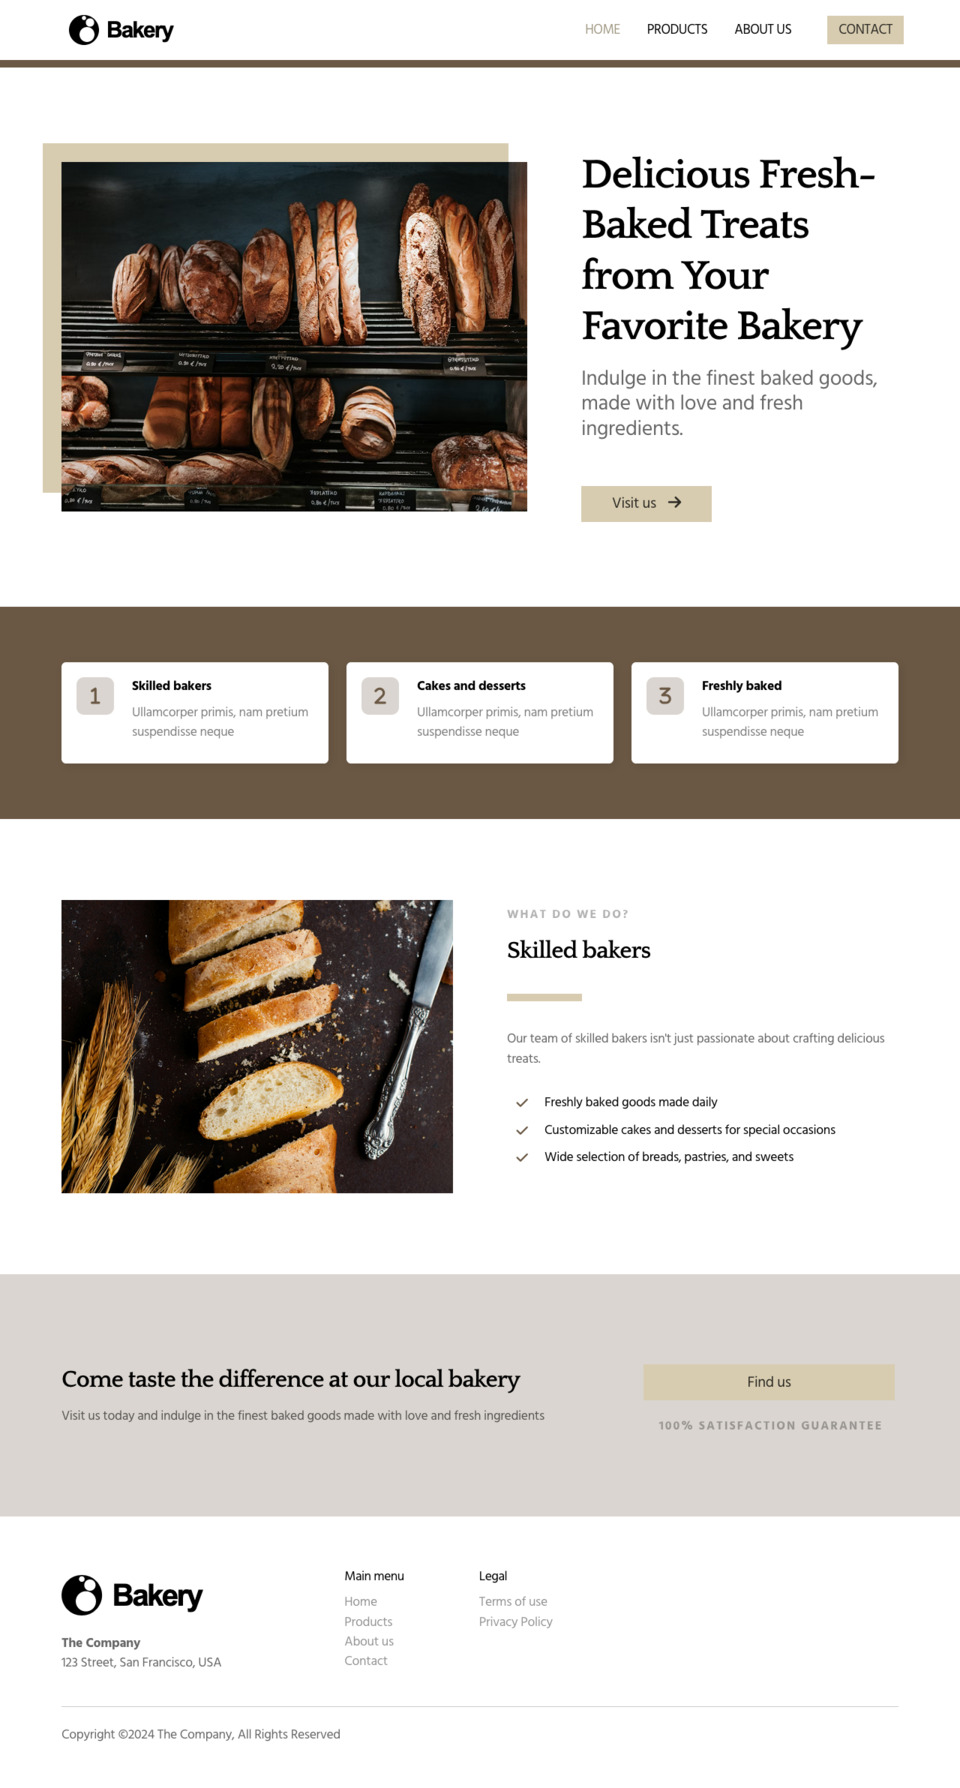 Bakery Website Template - Ideal for bakery owners, cake shops, pastry businesses, and other food-related small businesses.